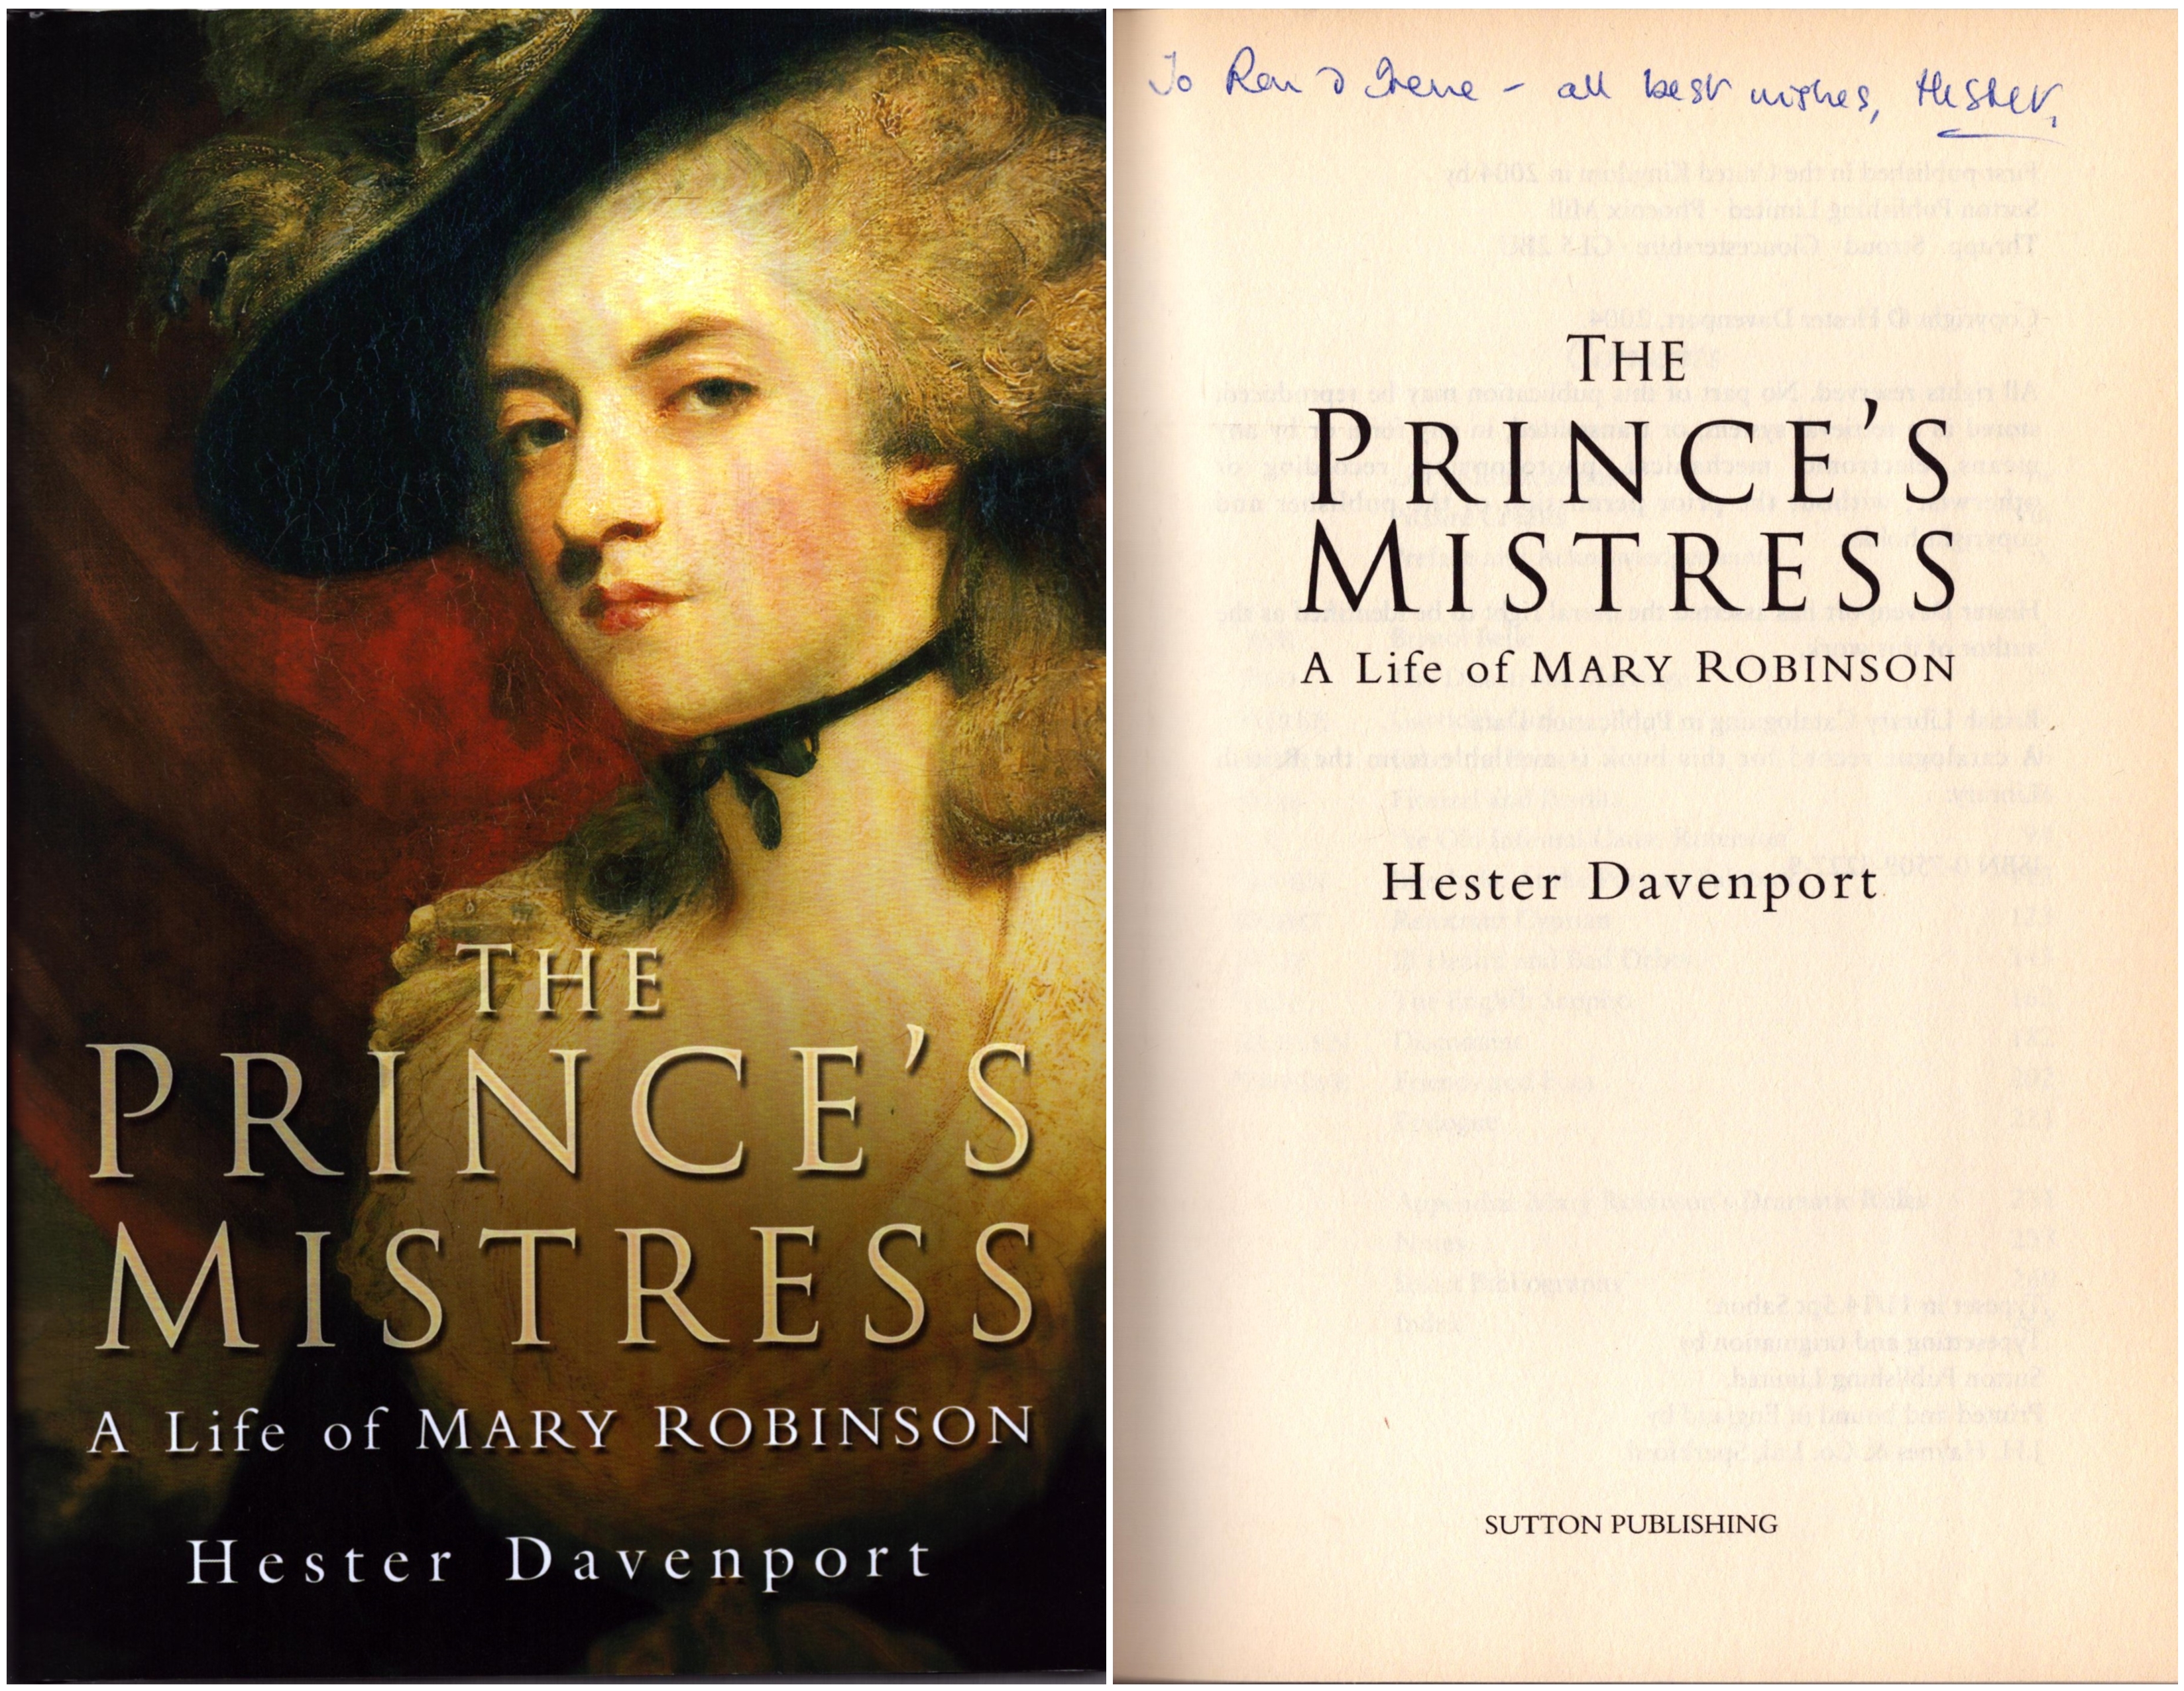 The Prince's Mistress by Hester Davenport signed by author. First Edition hardback book with dust